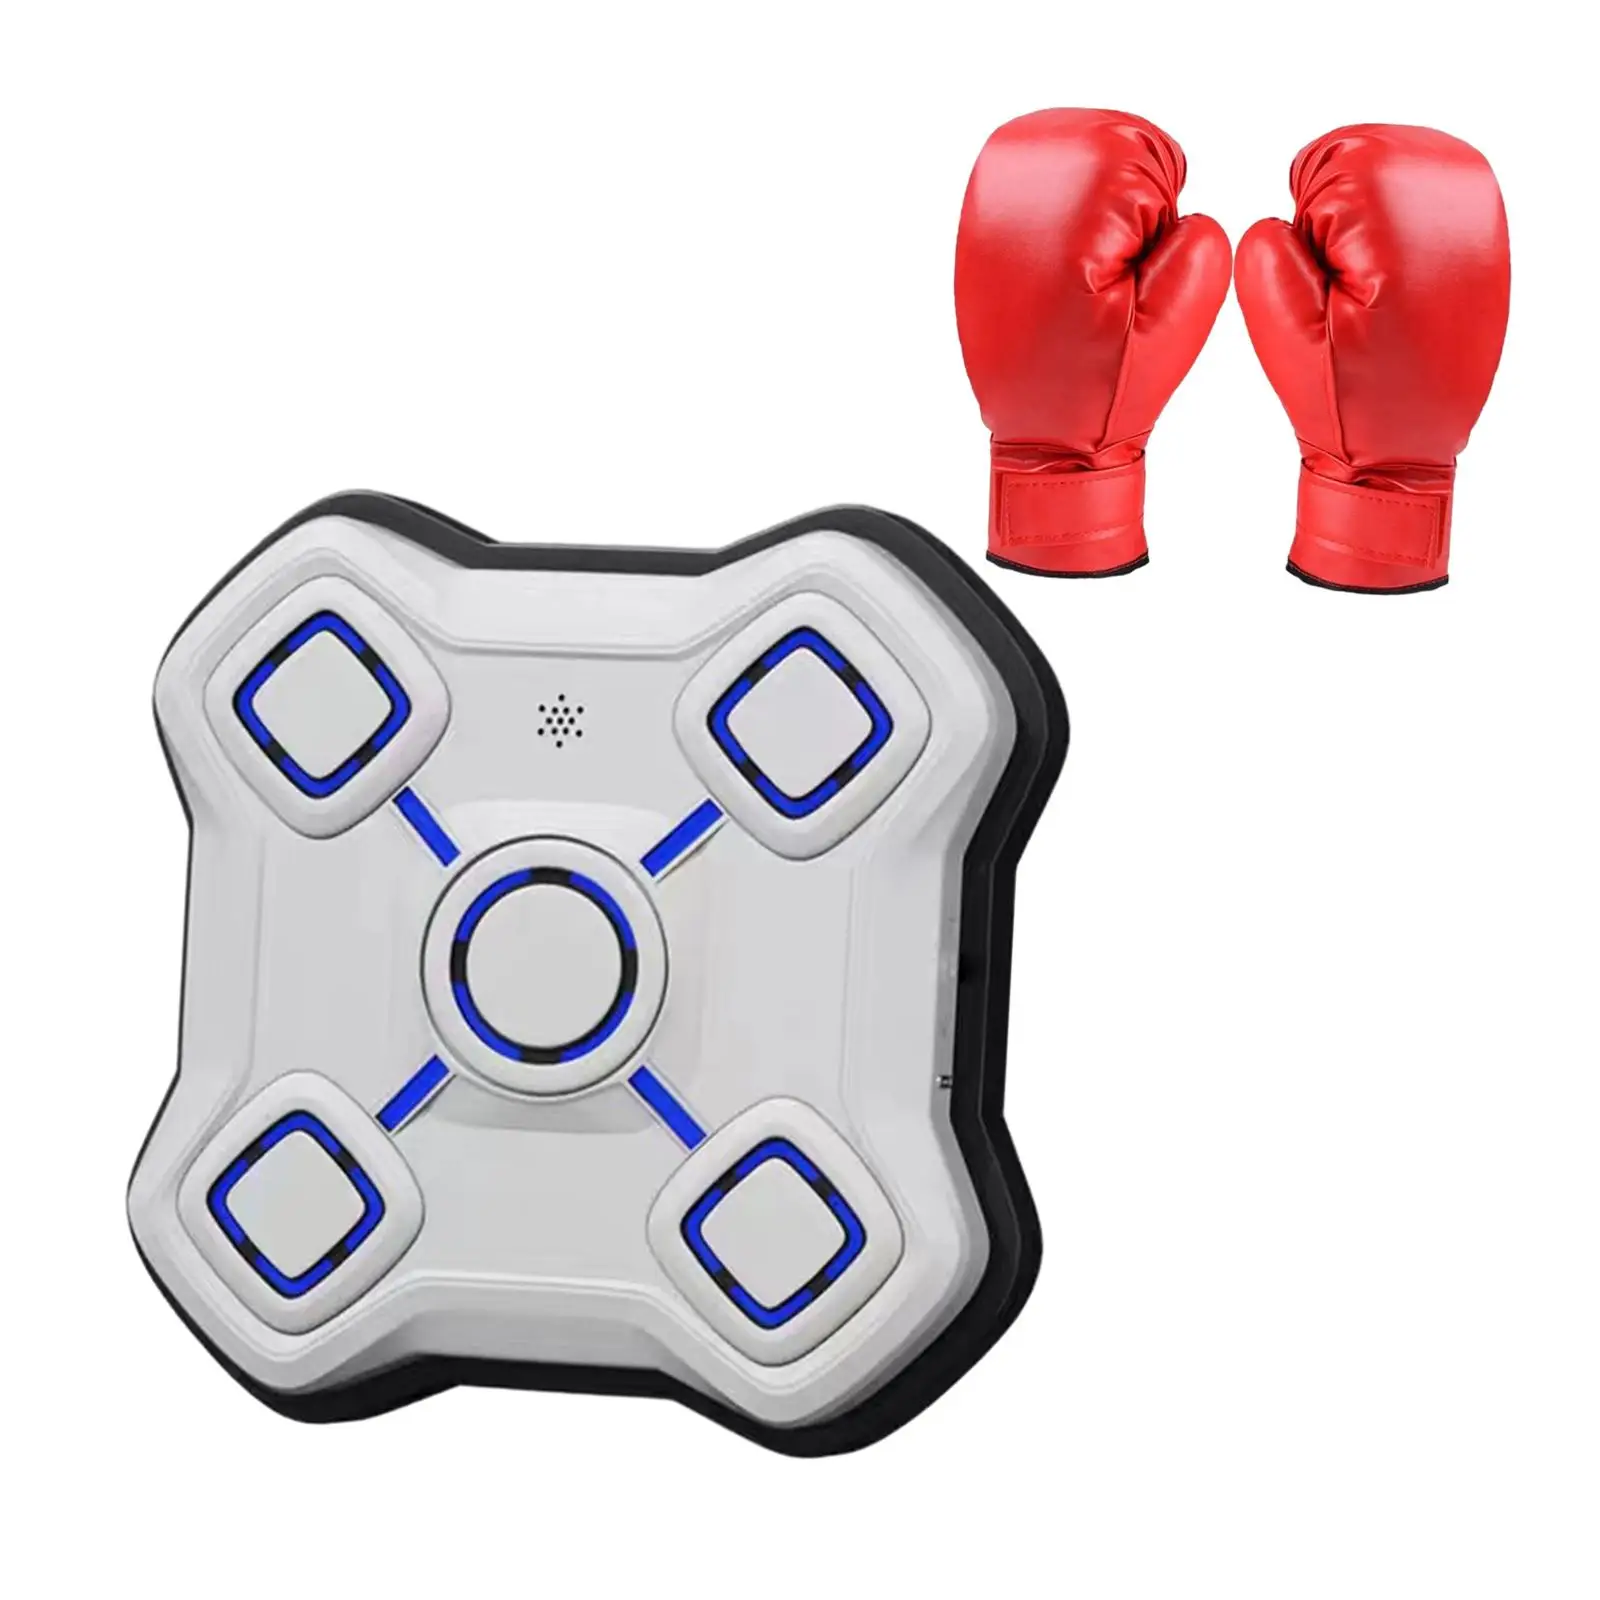 Boxing Machine Boxing Trainer Boxing Training Equipment Punching Pad for Sports Agility Kickboxing Strength Training Home